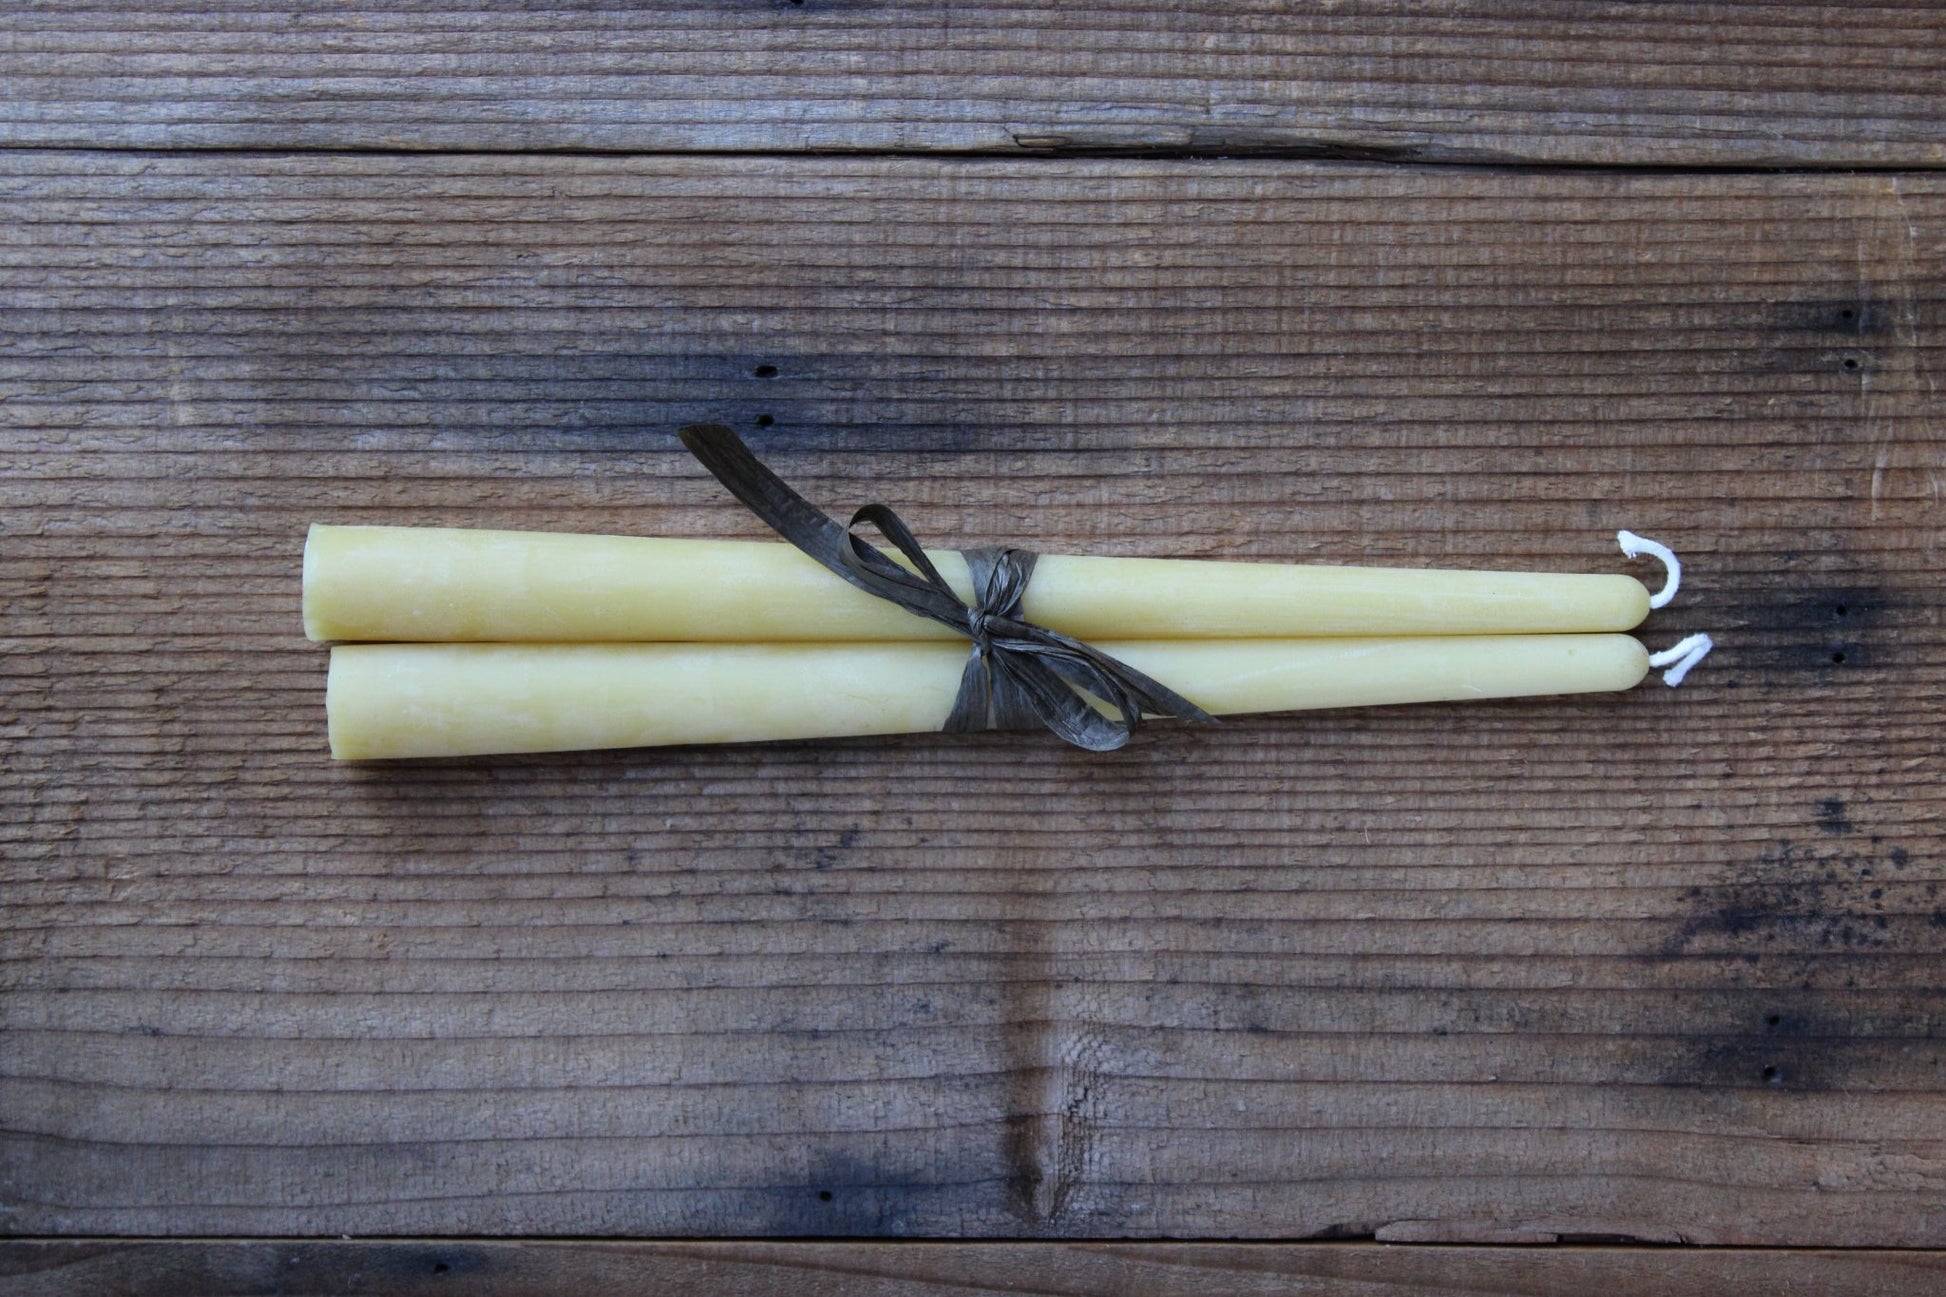 Bees Wax Taper Candle ~ Yellow Bees Wax Candle with Cotton Wick - Blue Sage Family Farm